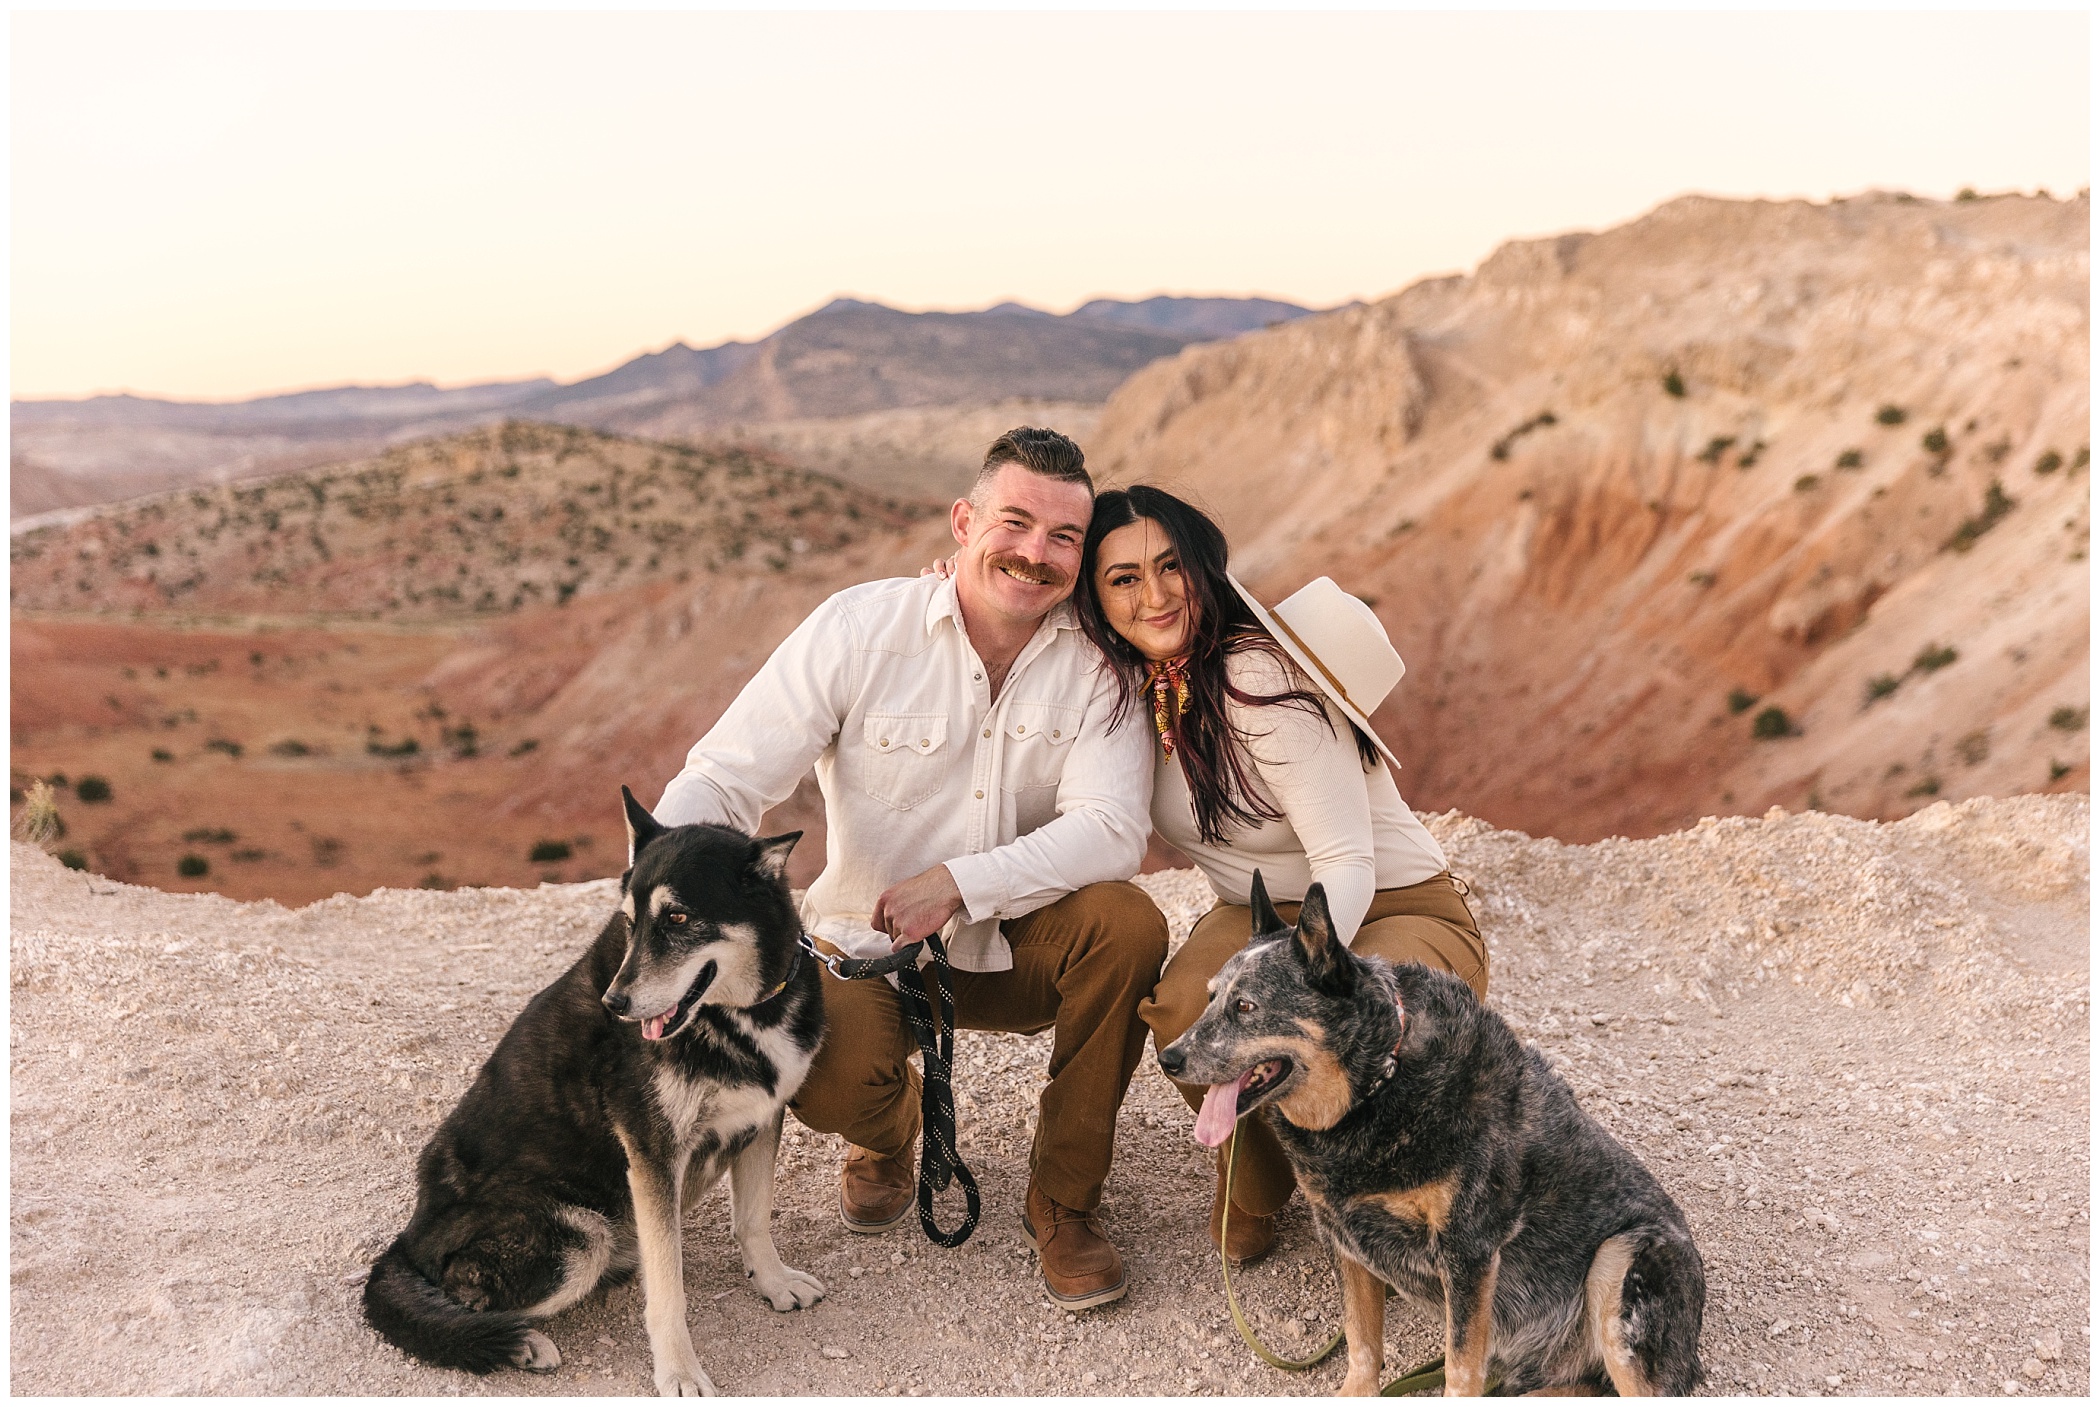 White Ridge engagement photo with two dogs at sunset in New Mexico desert